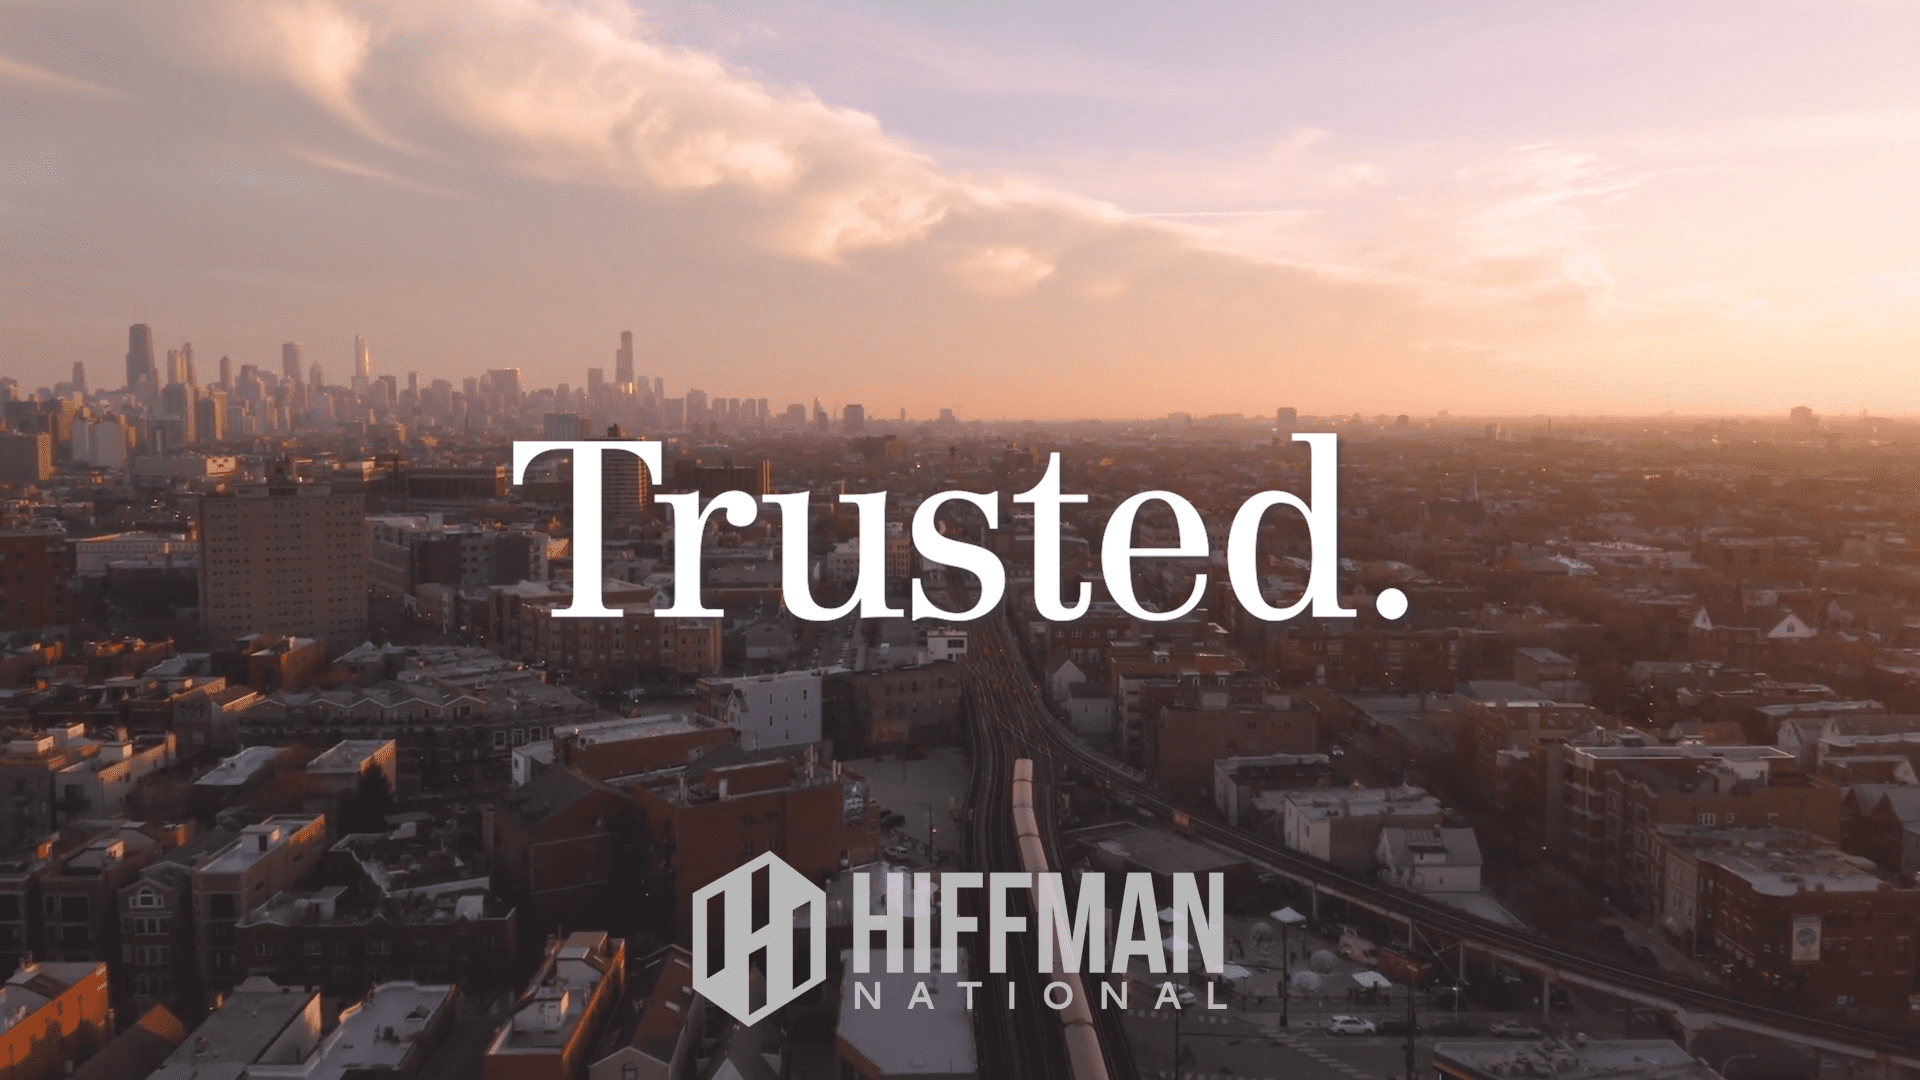 Hiffman National Commercial Debuts in National Markets